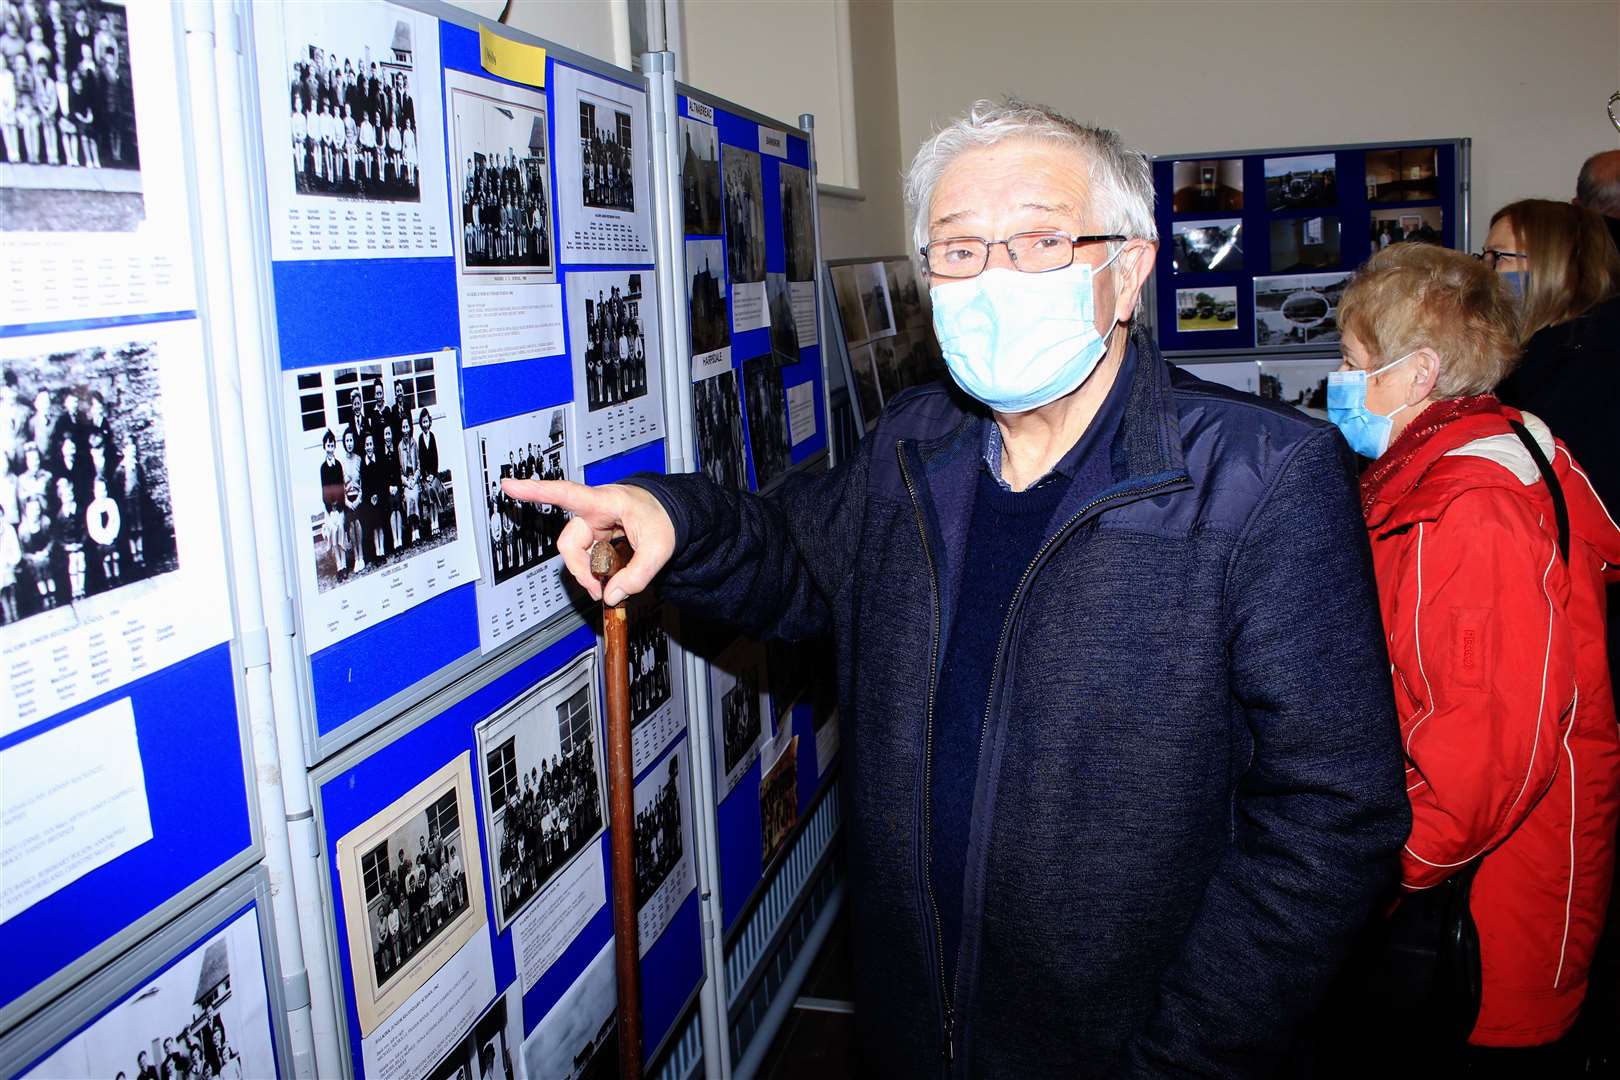 George Manson pointing to one of the school photos from yesteryear. Picture: Alan Hendry